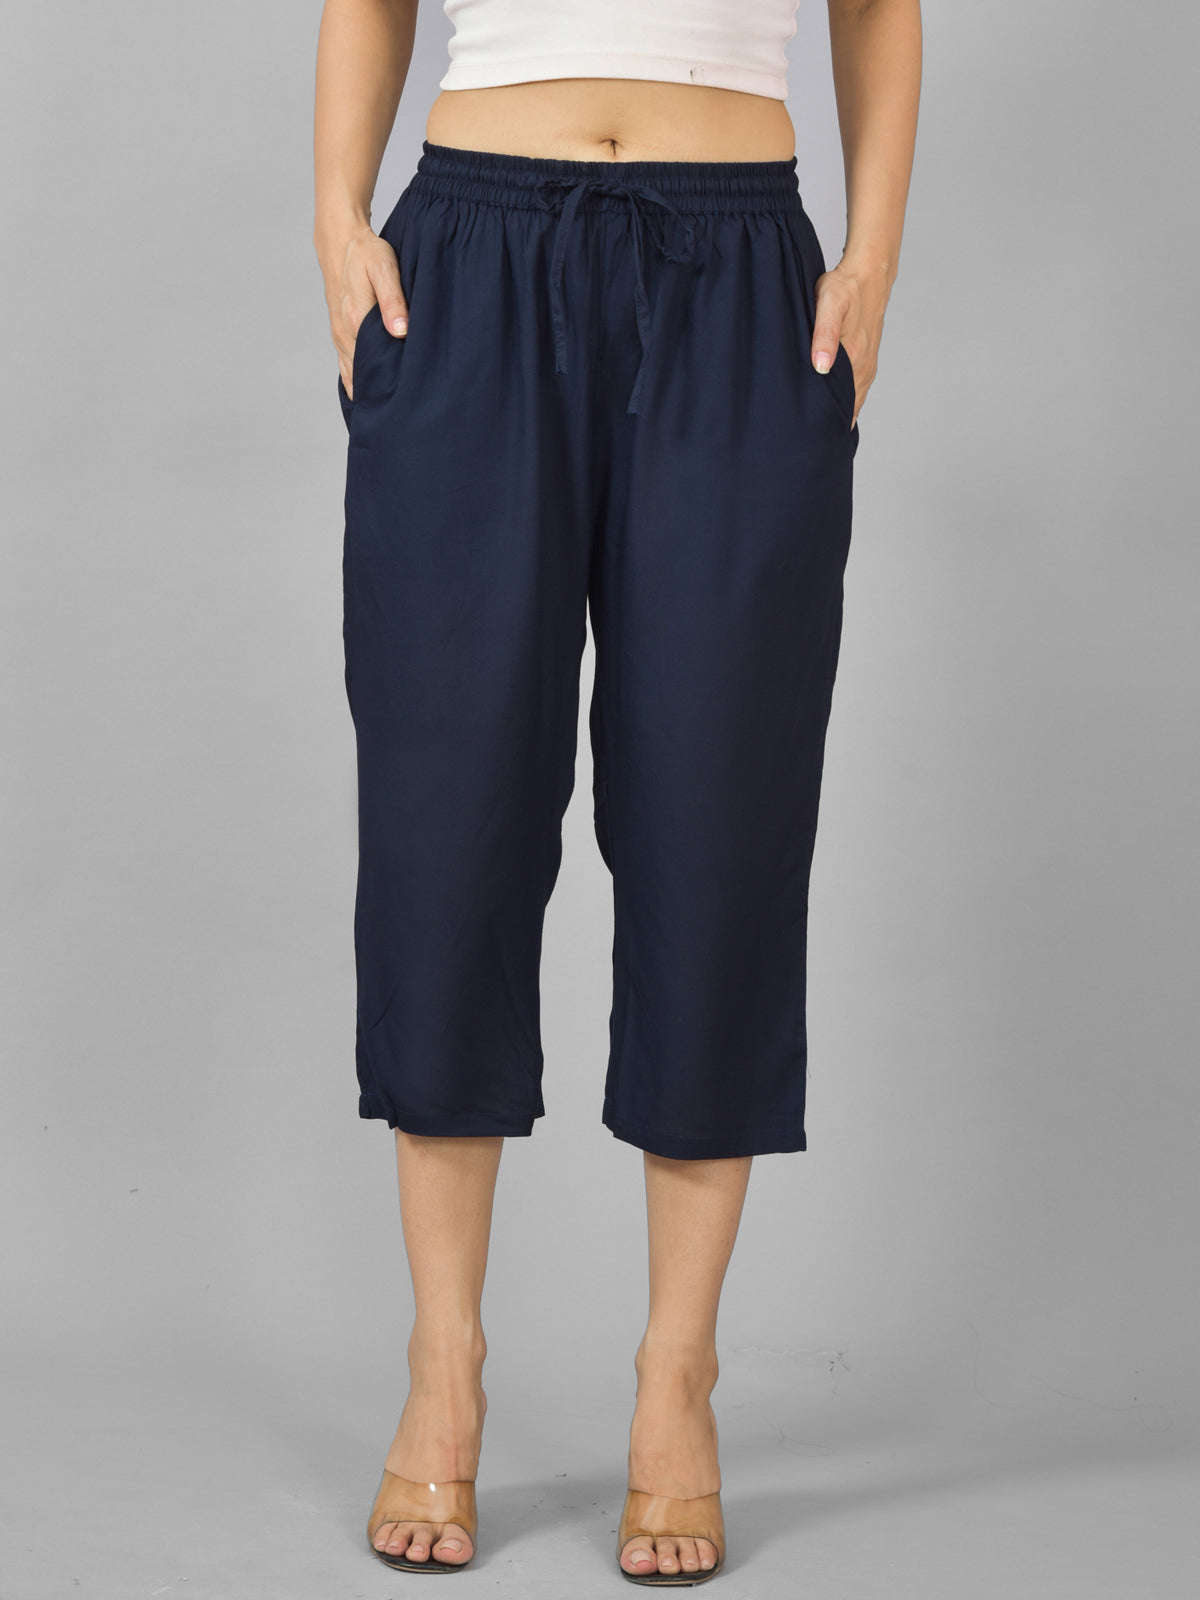 Pack Of 2 Womens Gajri And Navy Blue Calf Length Rayon Culottes Trouser Combo